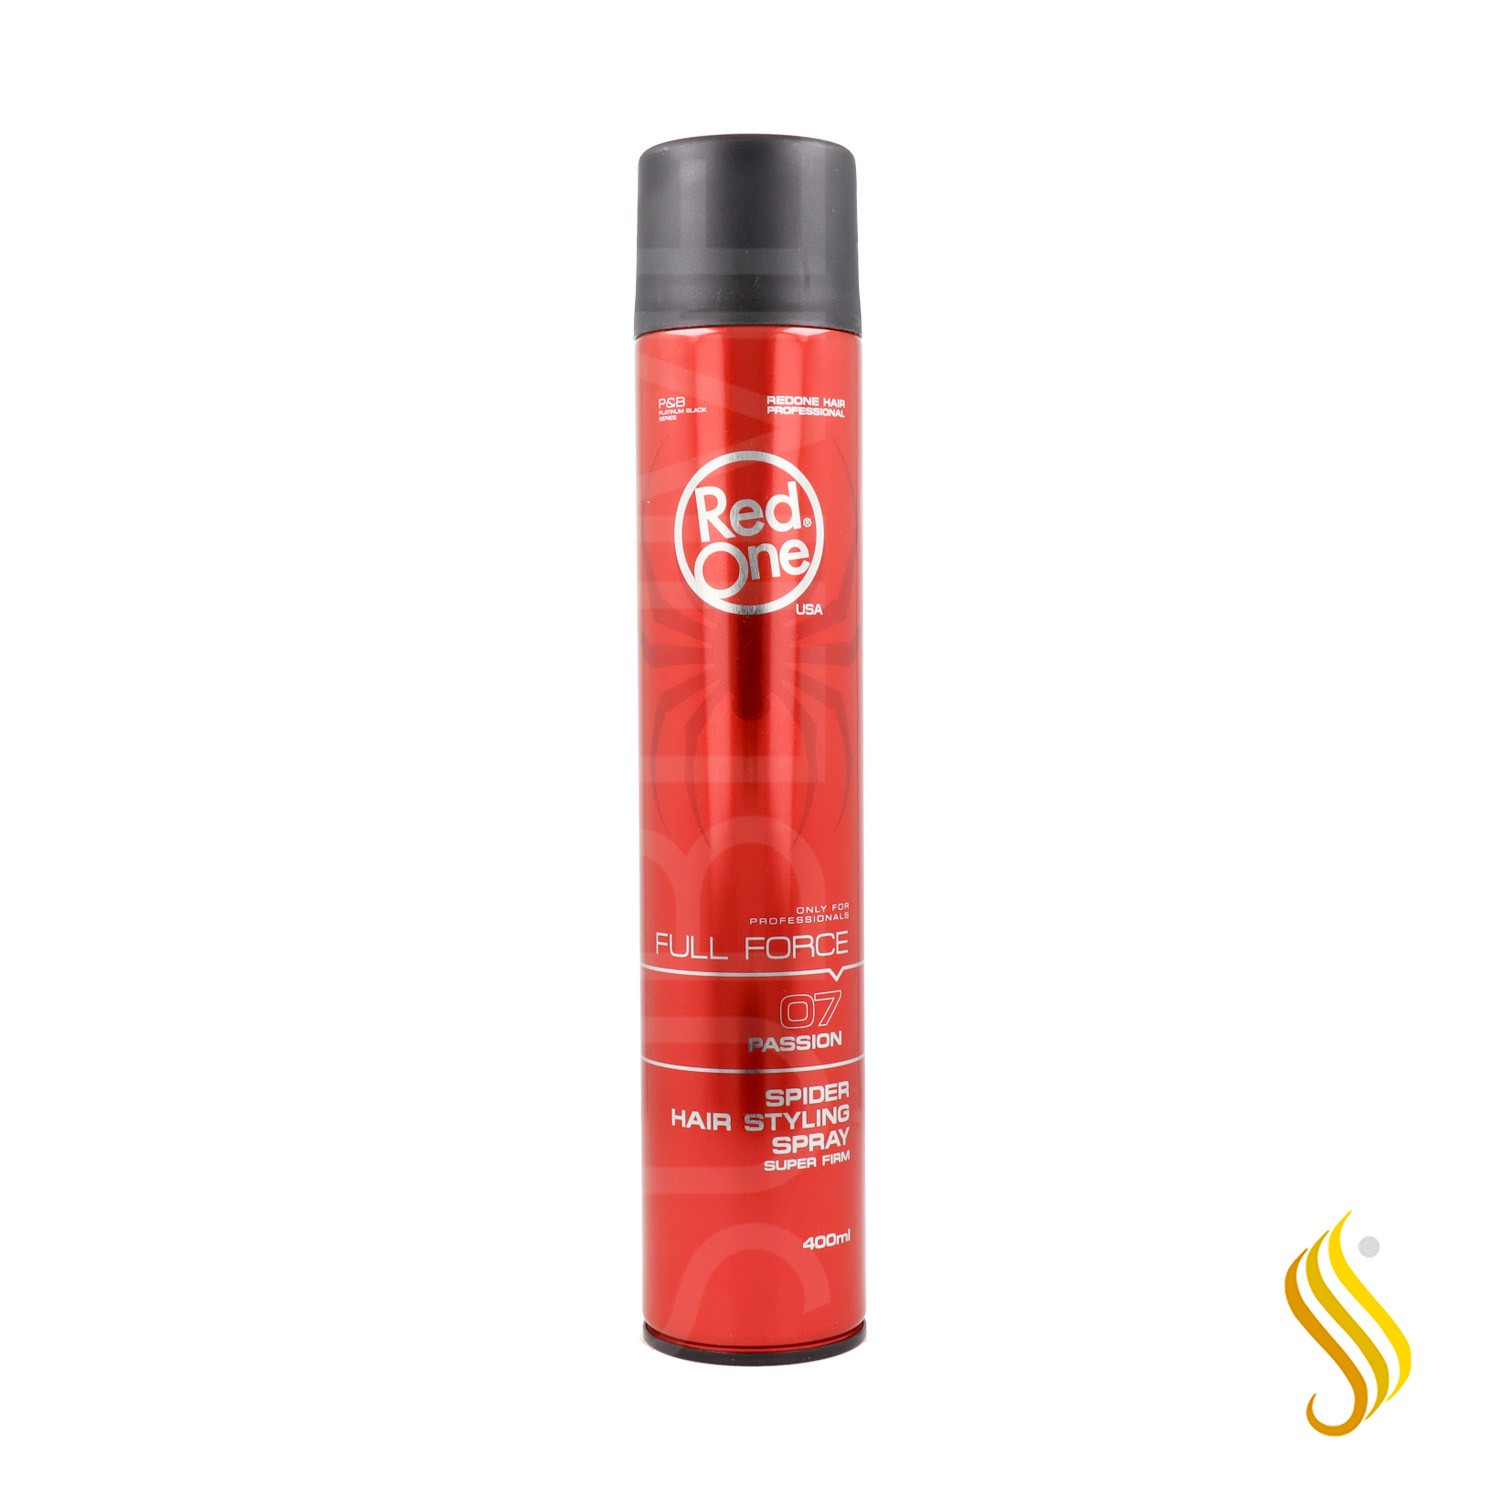 Red One Hair Styling Spray Full Force Passion 400 ml